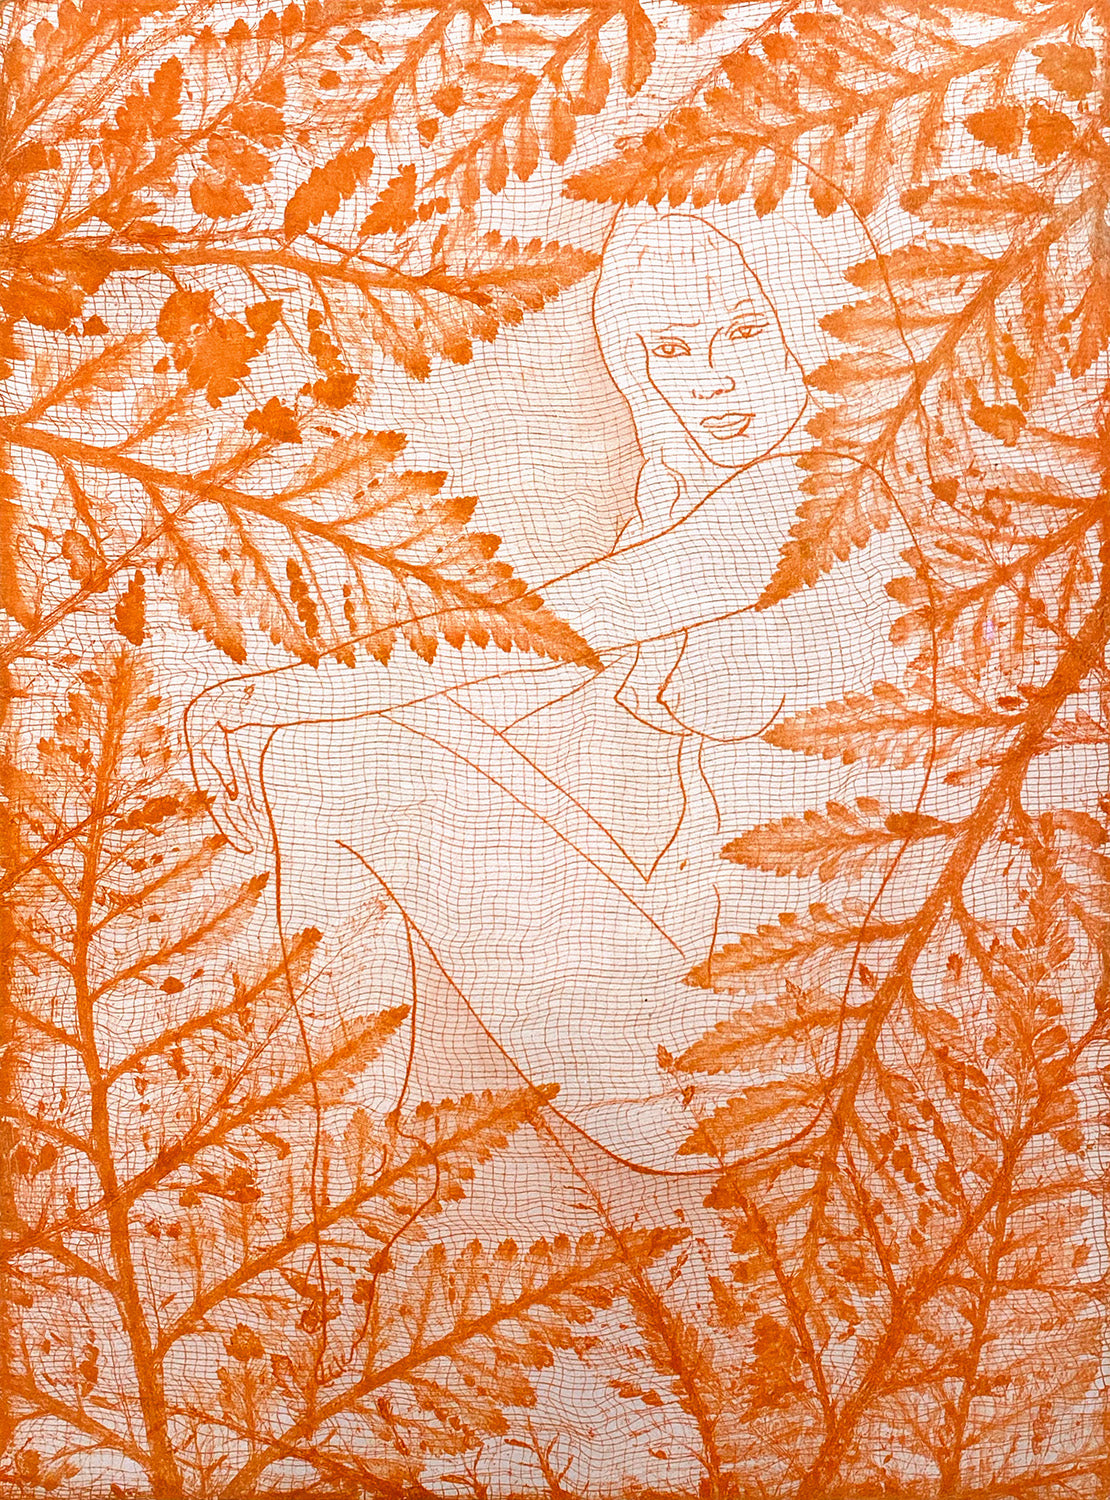 Indira Cesarine "Eve in the Leaves"